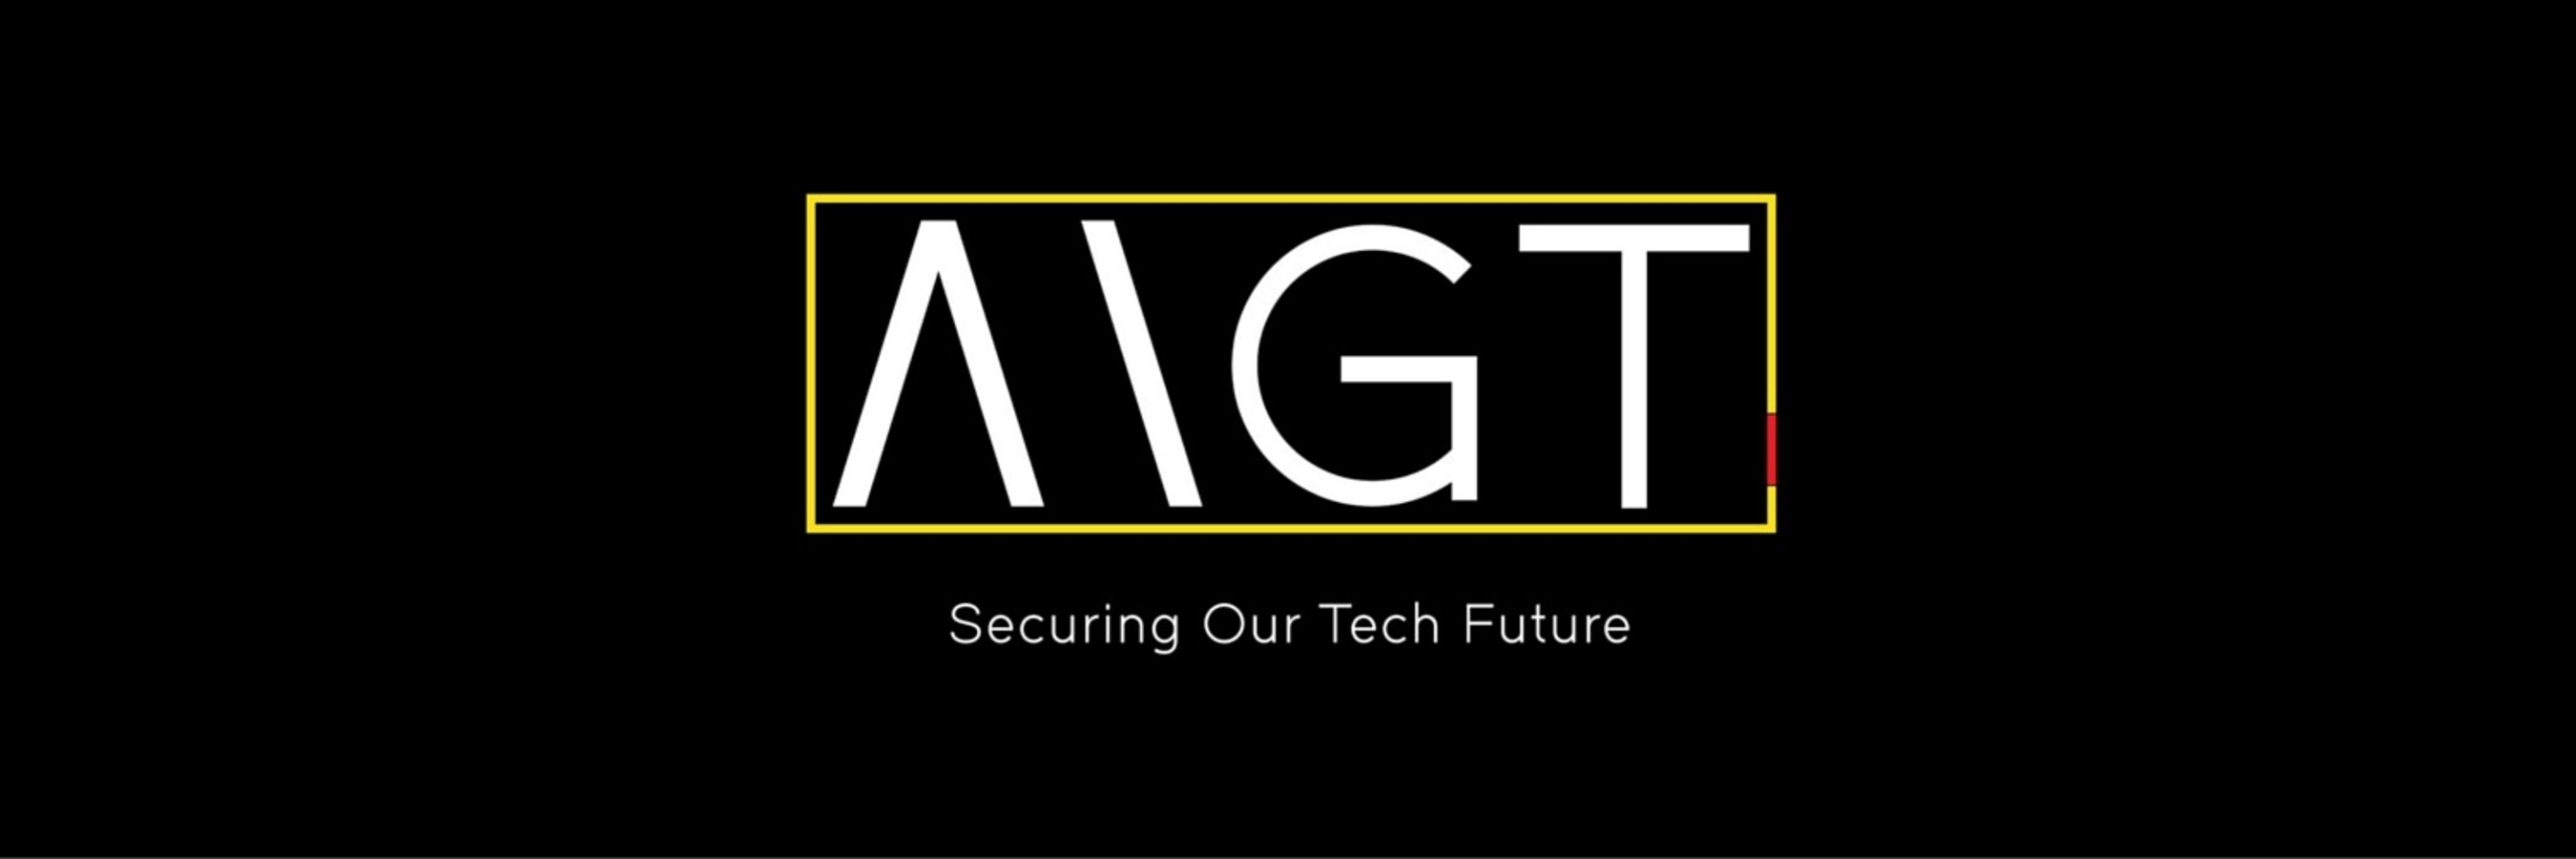 MGT Capital Investments, Inc.